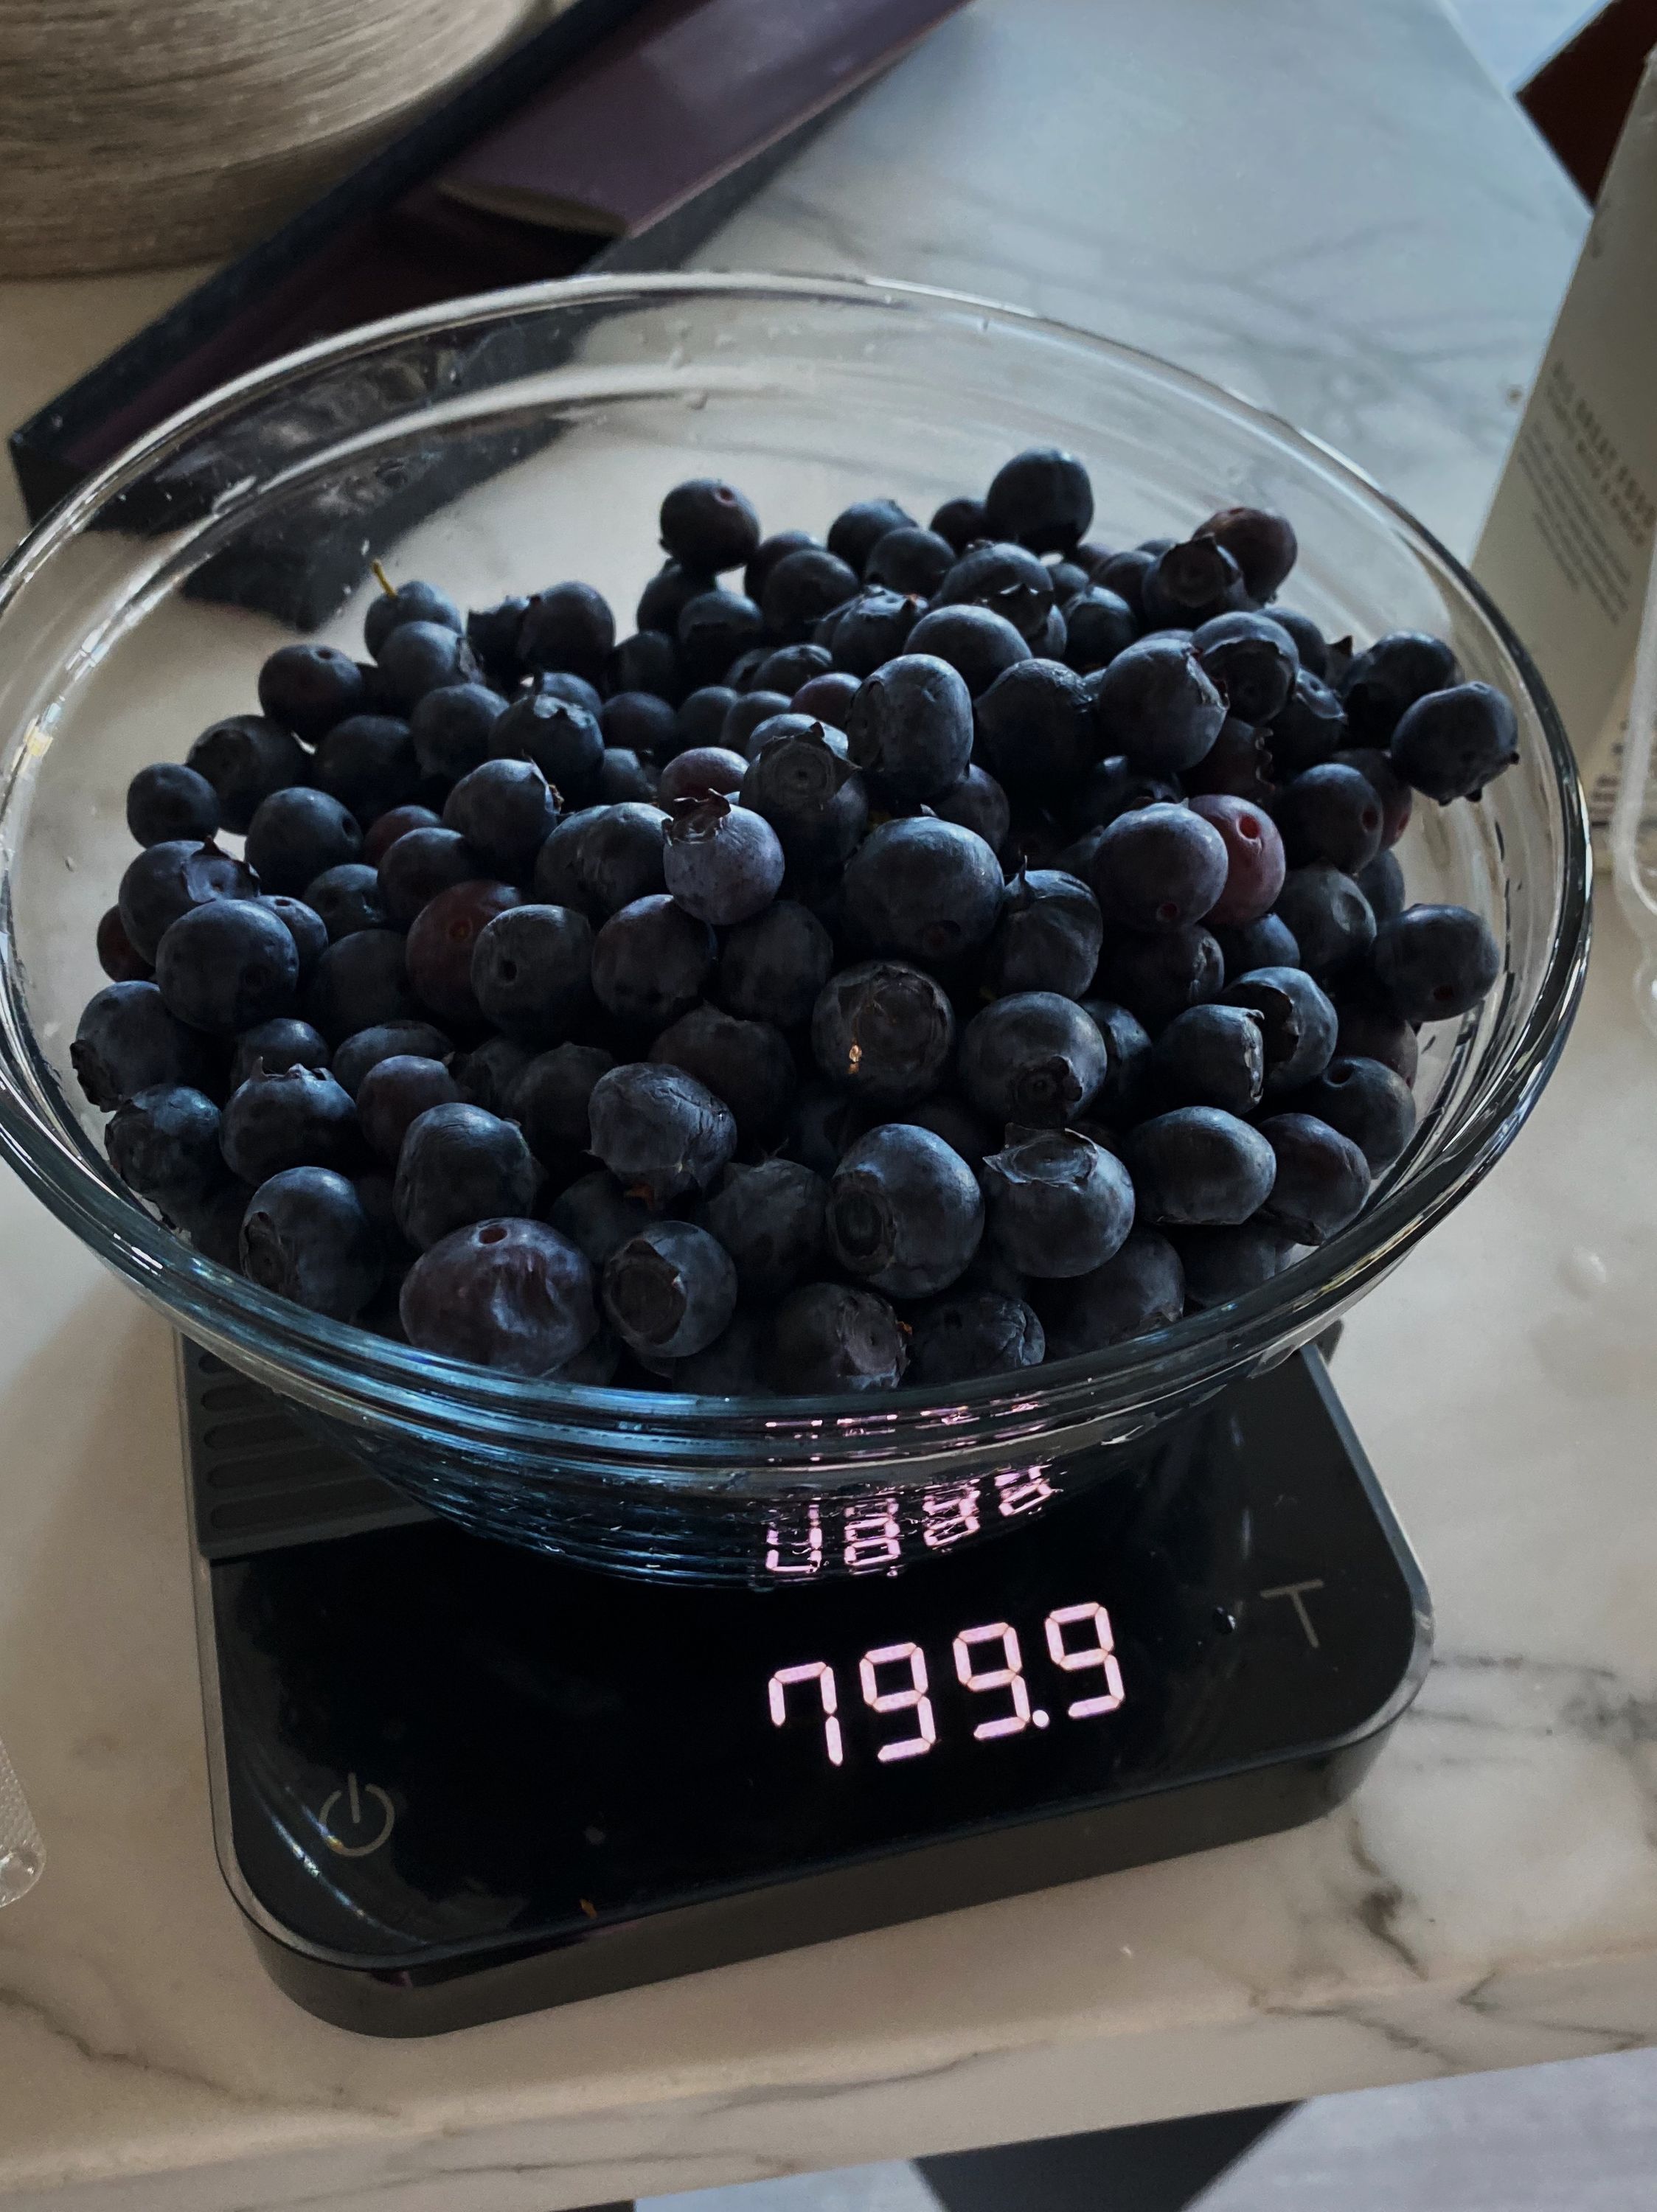 Blueberries on a scale